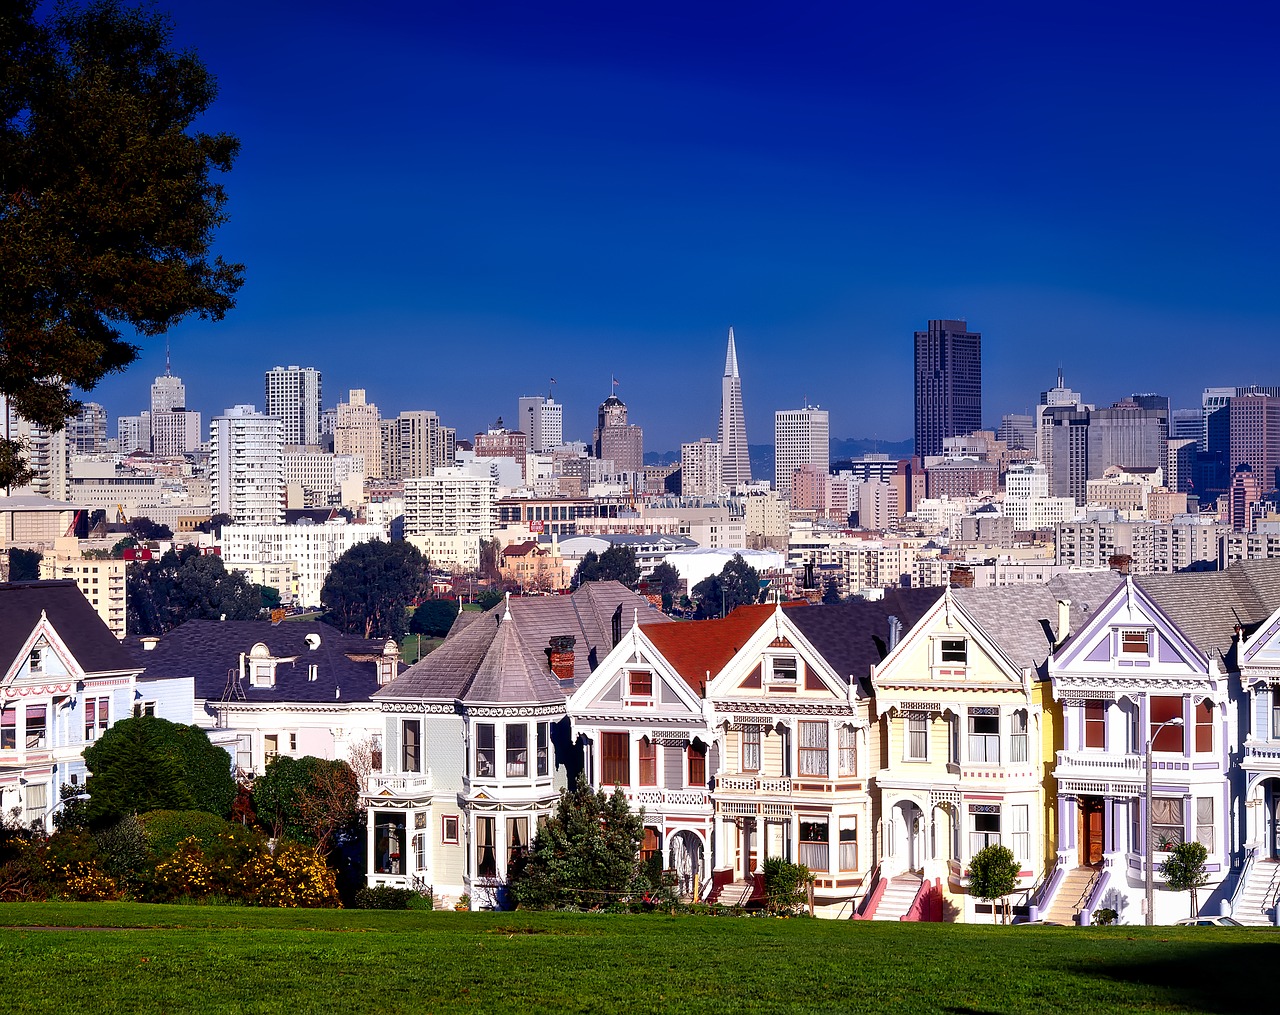 residential area in San Francisco